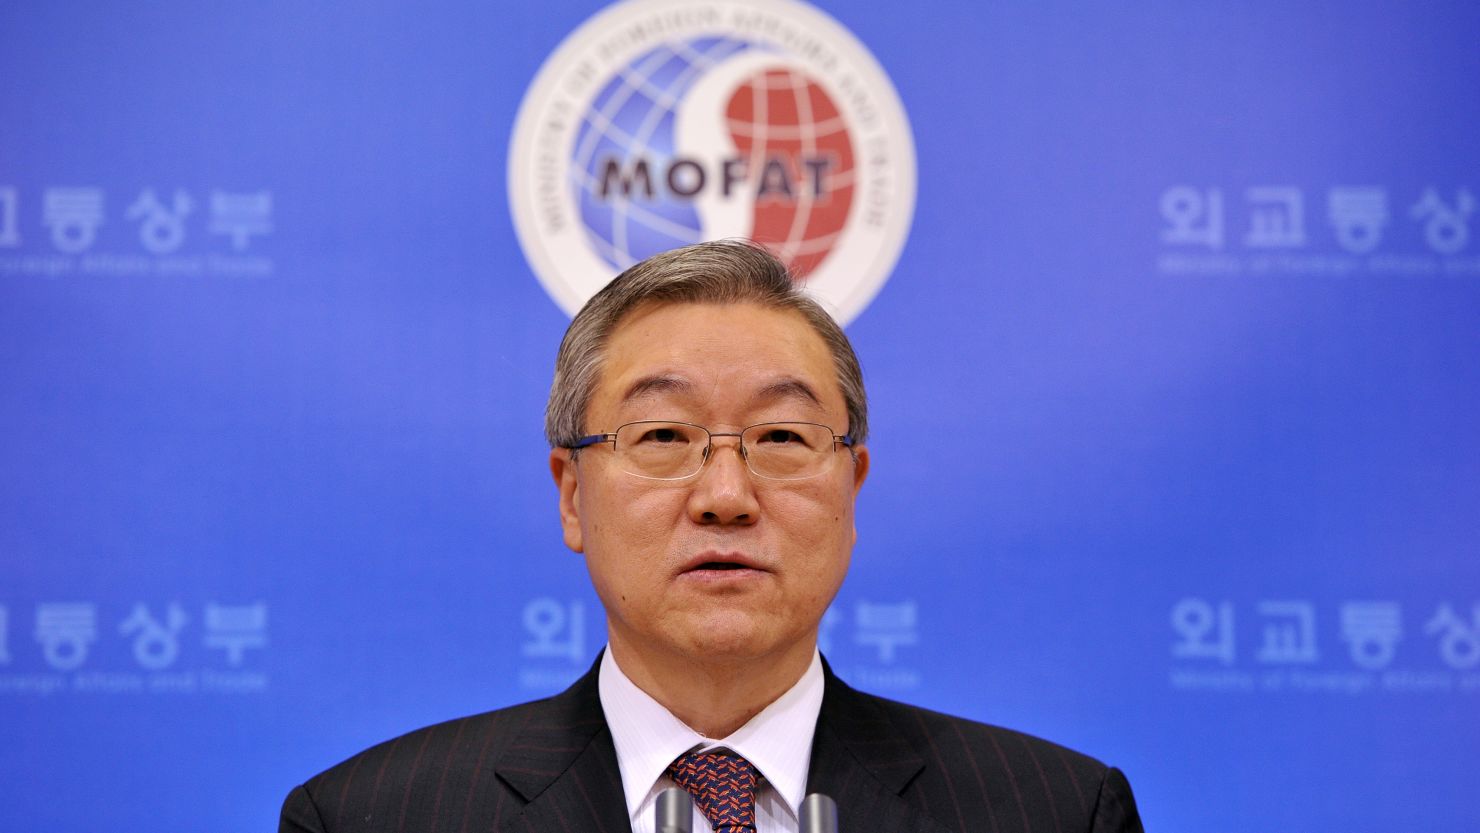 South Korea Foreign Minister Kim Sung-Hwan said no country in the region knows the intentions of North Korea's new leader.